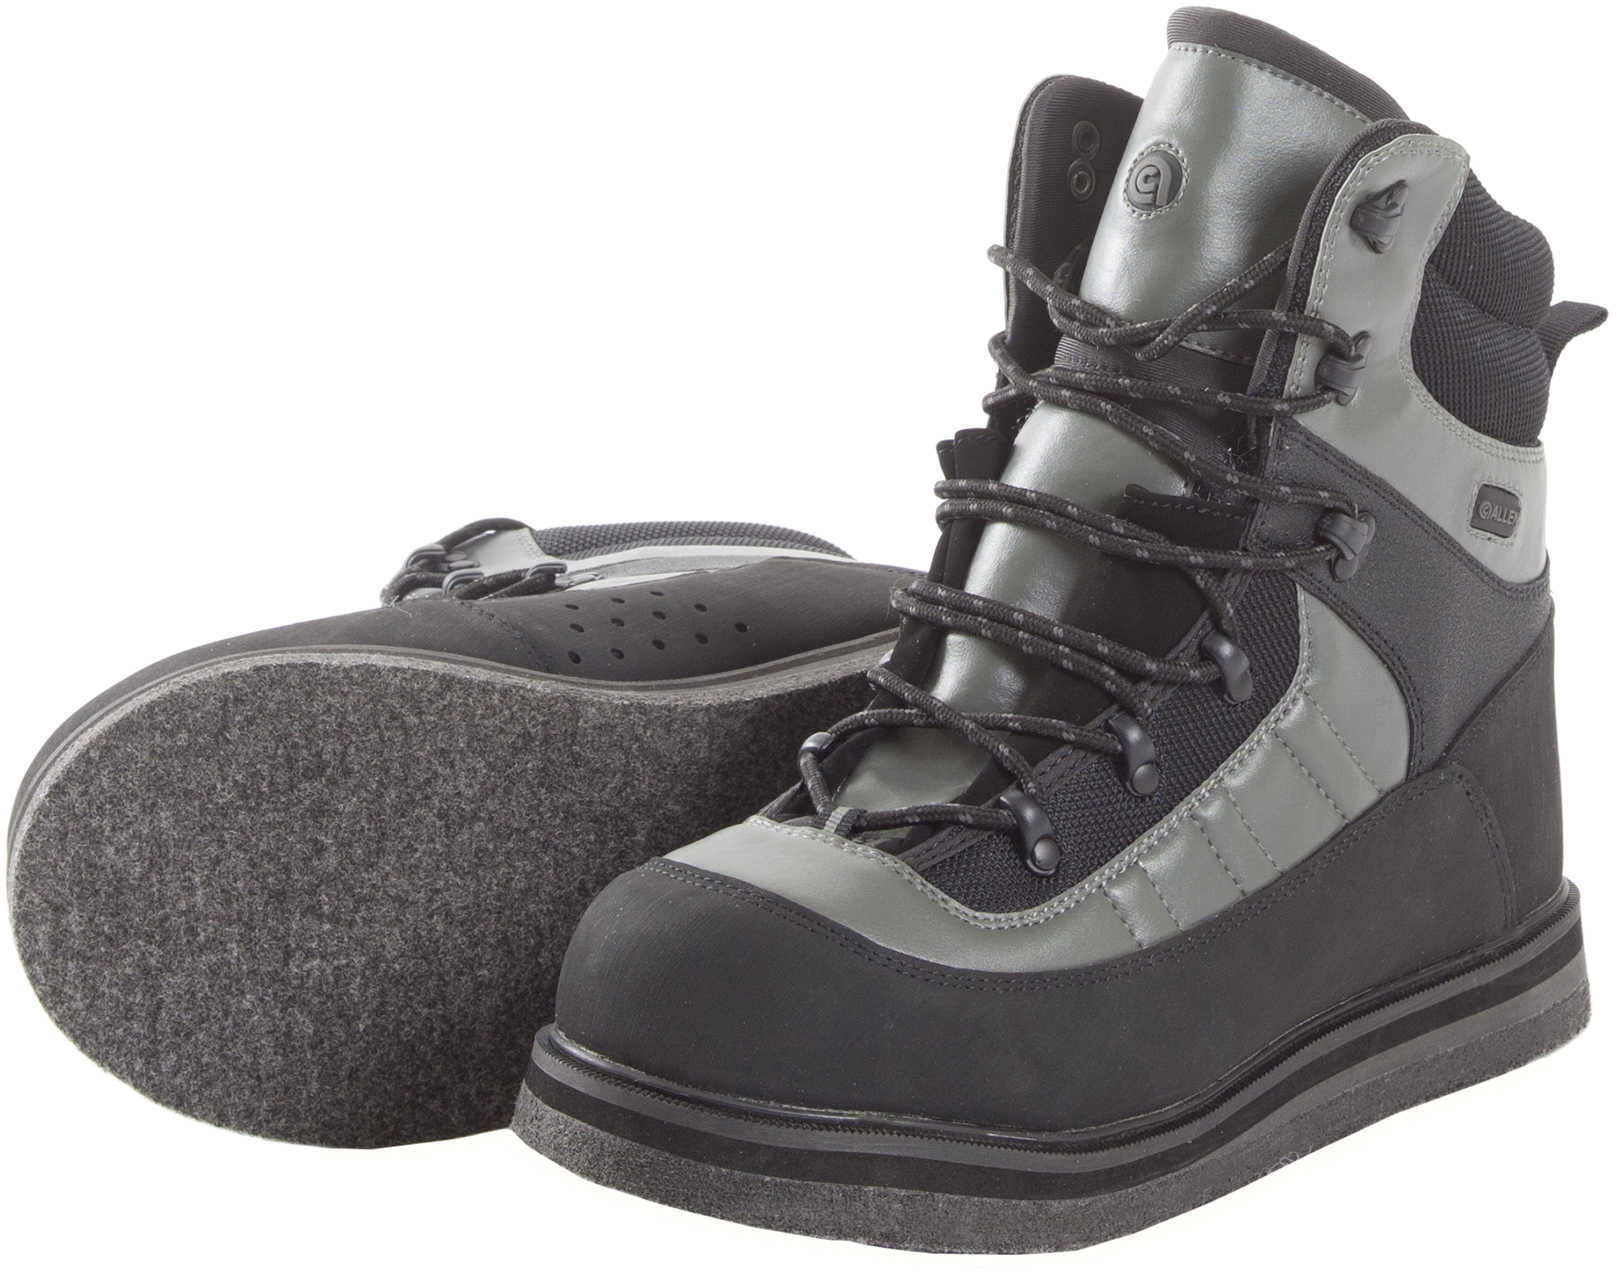 Allen Wading Boot - Sweetwater Felt Sole, Size 6, Gray and Black Md: 15796